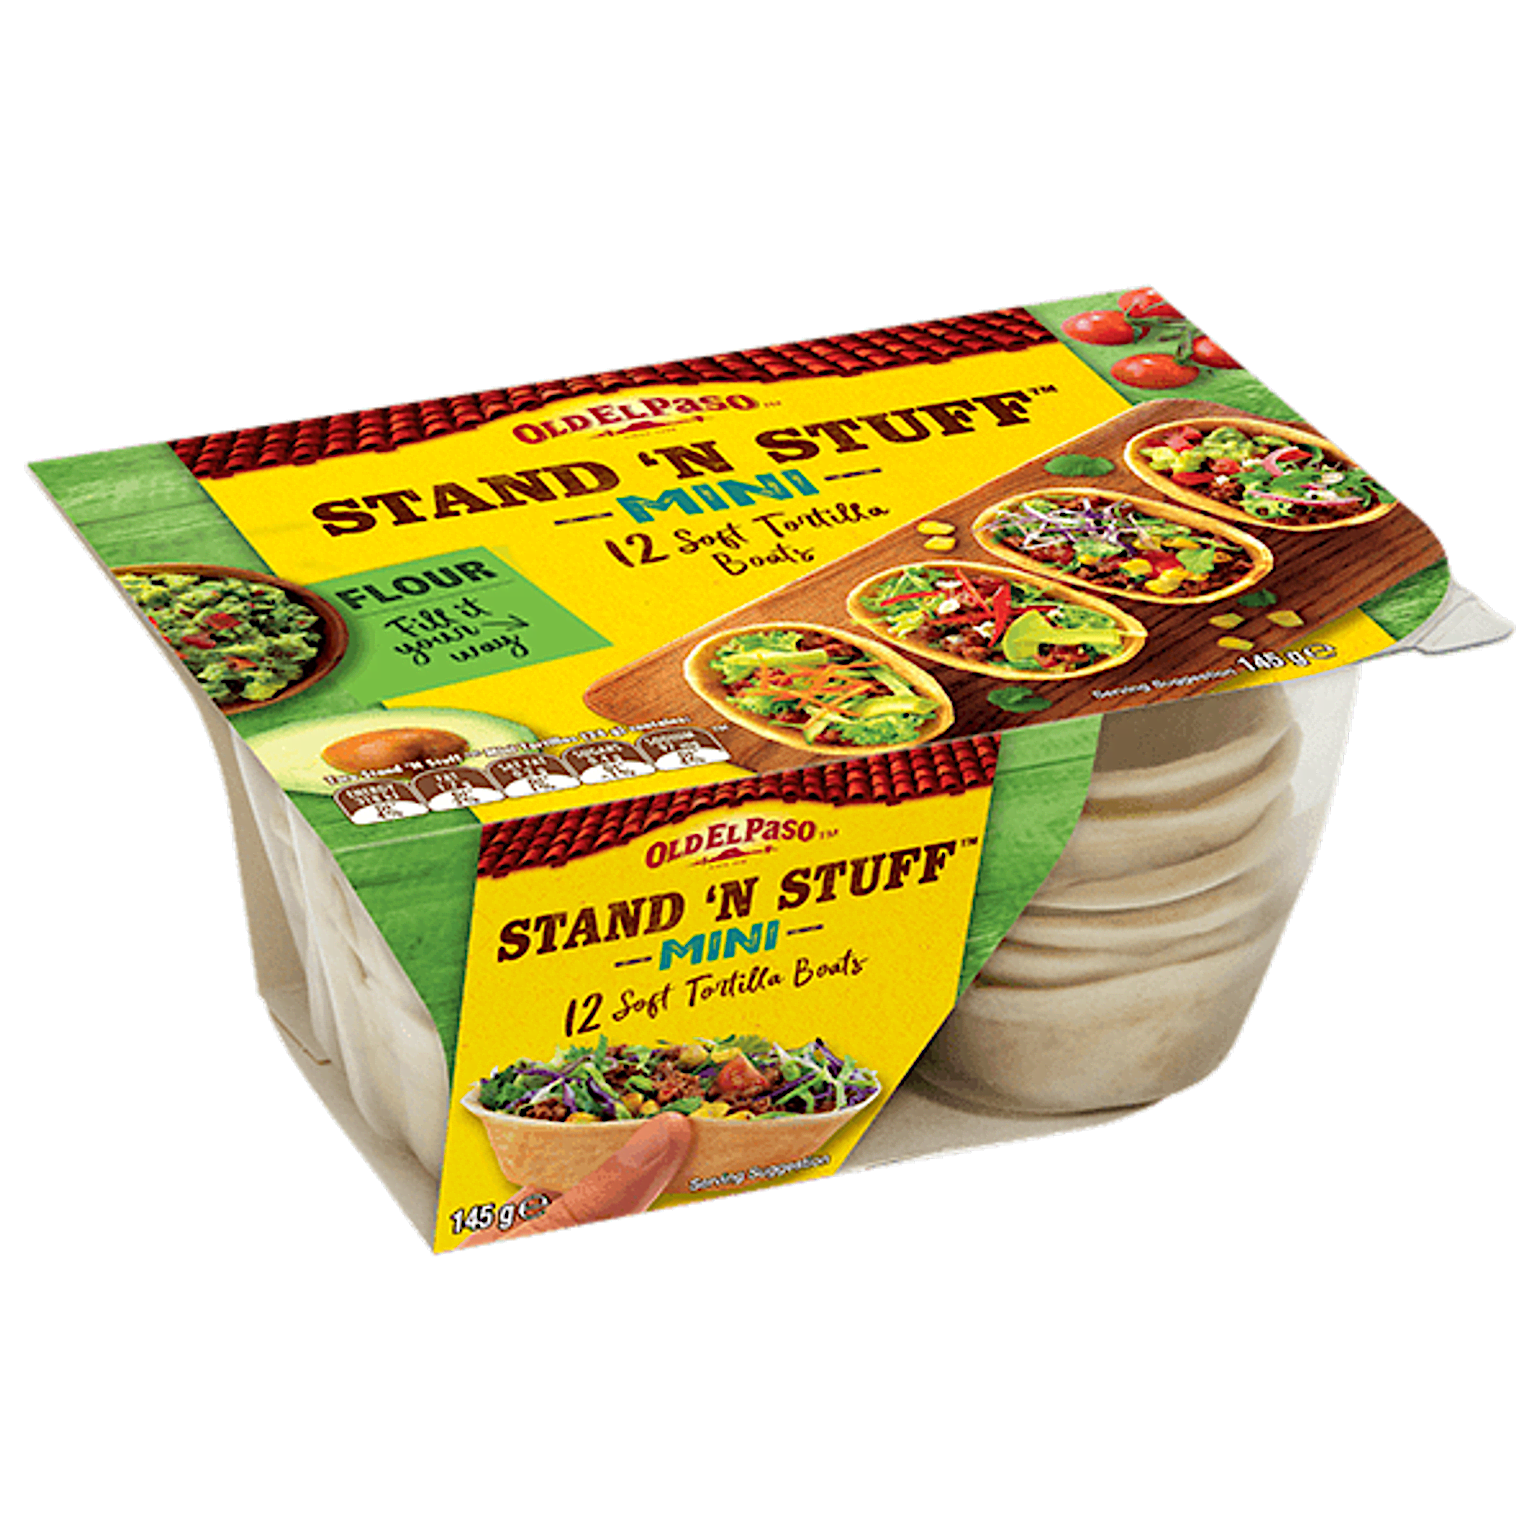 a pack of Old El Paso's stand n stuff 12 mini soft tortilla boats (145g)